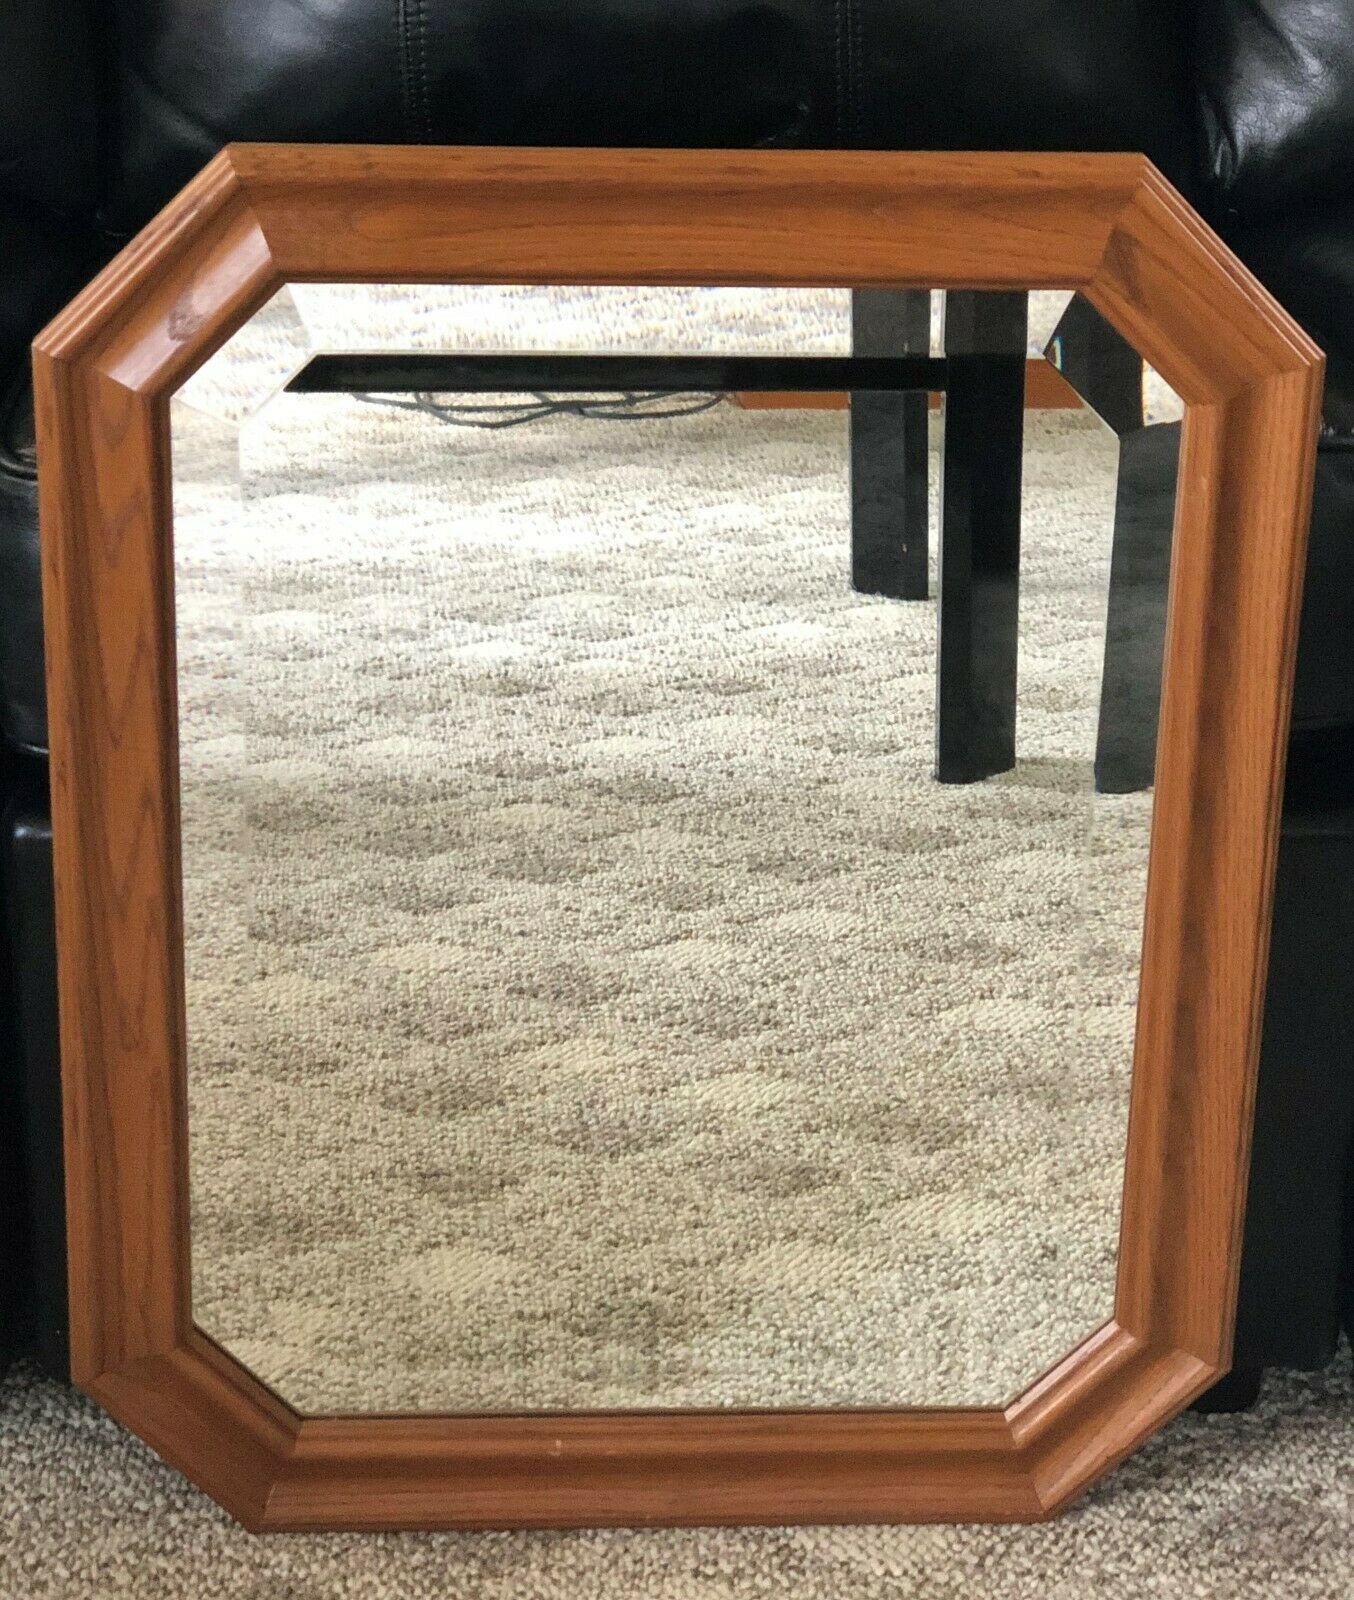 The Uttermost Company Wooden Mirror - 23" x 19" Mirror - Wood Finish - $34.64